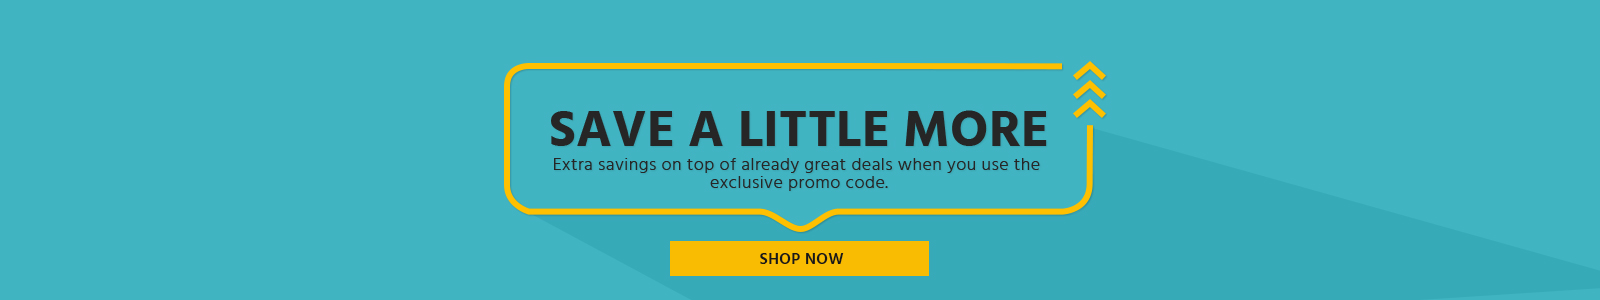 Save a little More
Extra savings on top of already great deals when you use the exclusive promo code.
Shop Now